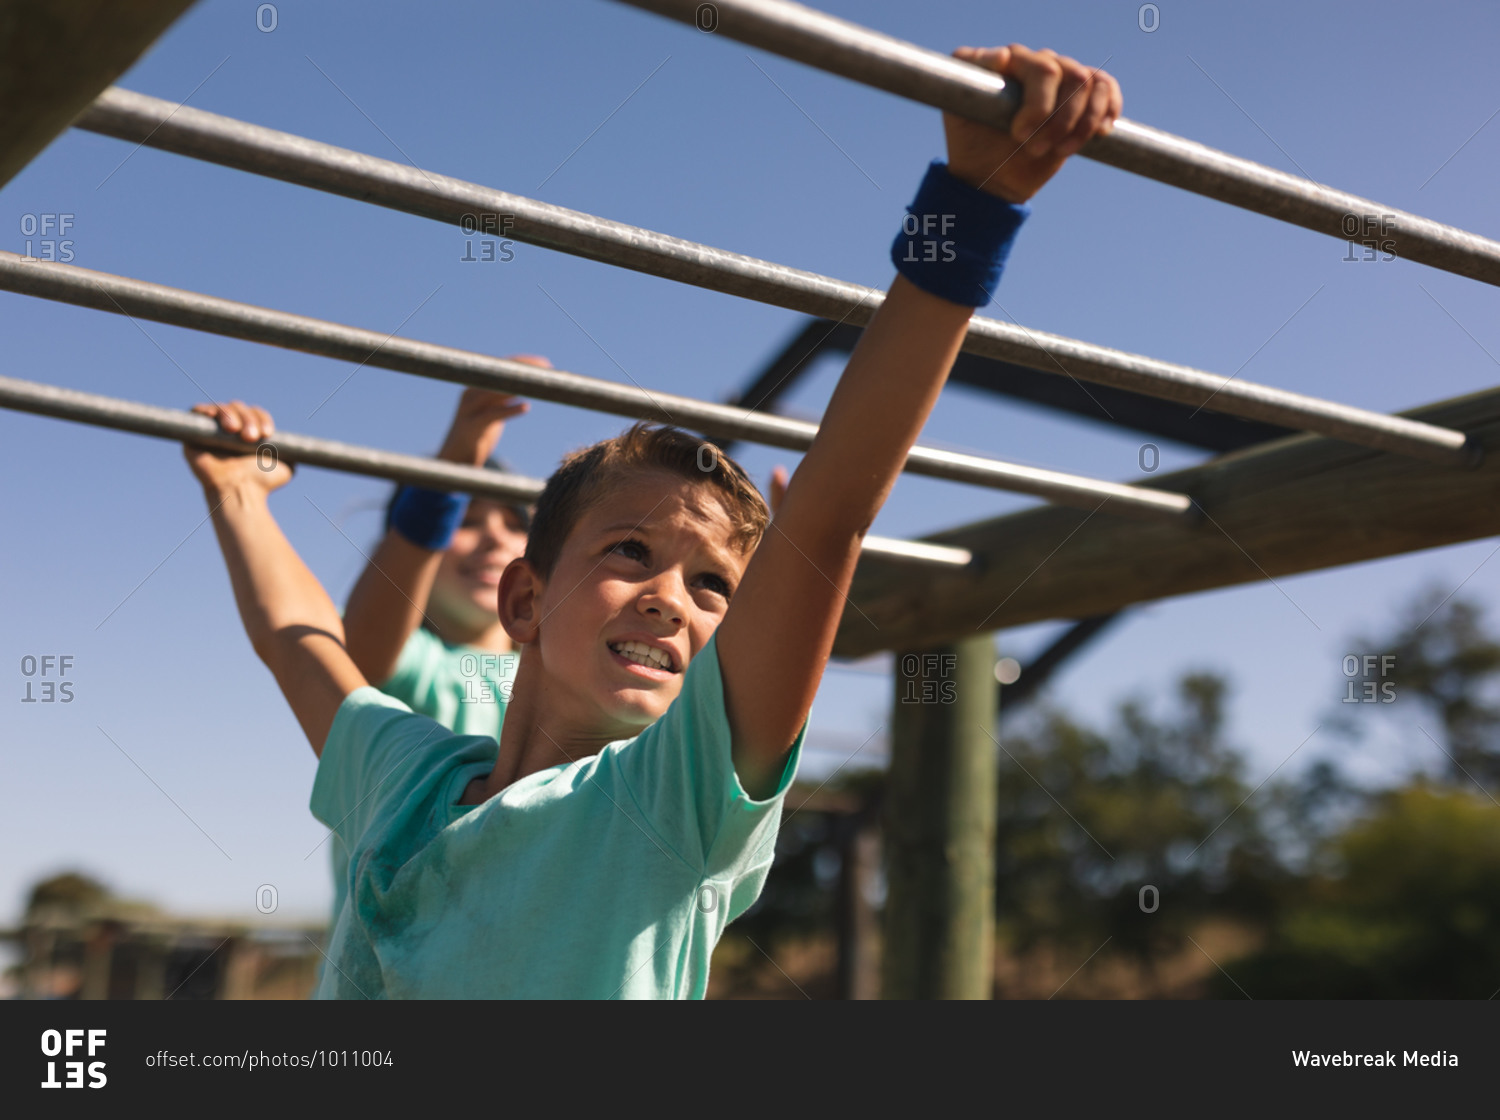 Smiling Caucasian boy with brown hair at a boot camp on a sunny day, wearing green t shirt, on a jungle gym hanging from the monkey bars against a blue sky, another boy behind him in the background